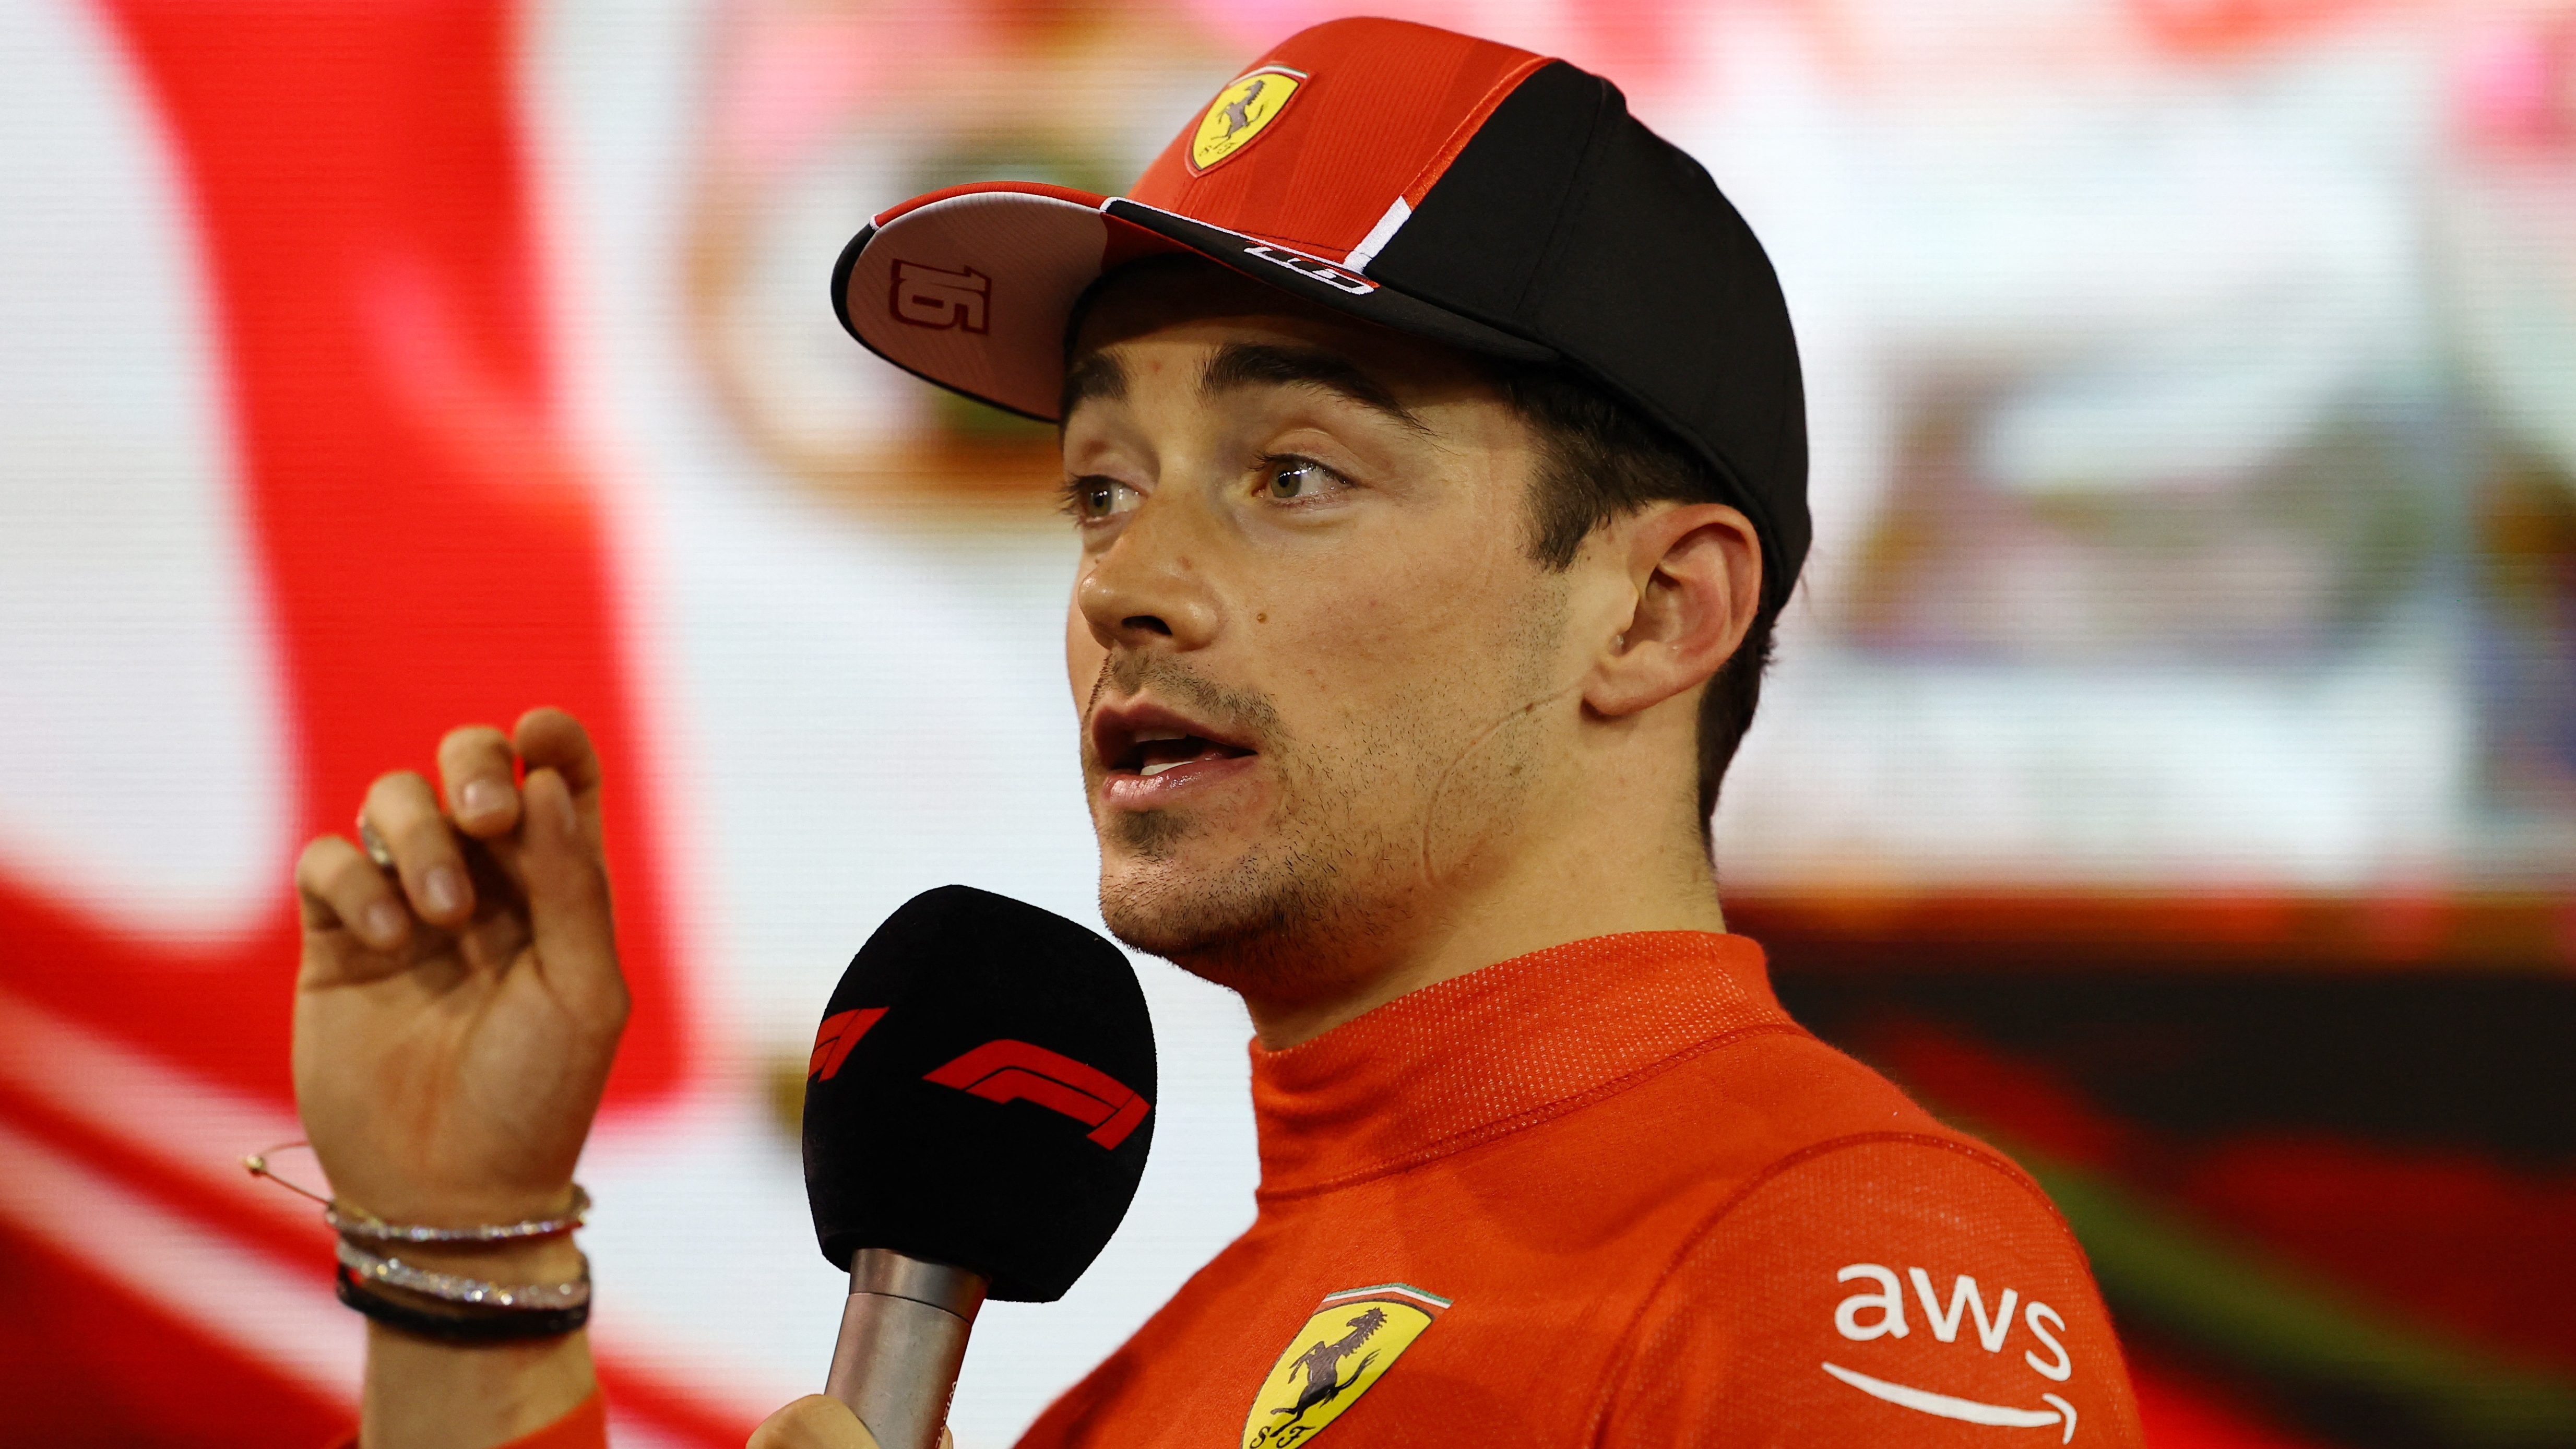 Formula One F1 - Bahrain Grand Prix - Bahrain International Circuit, Sakhir, Bahrain - March 4, 2023 Ferrari's Charles Leclerc during an interview after finishing the race in third place REUTERS/Rula Rouhana